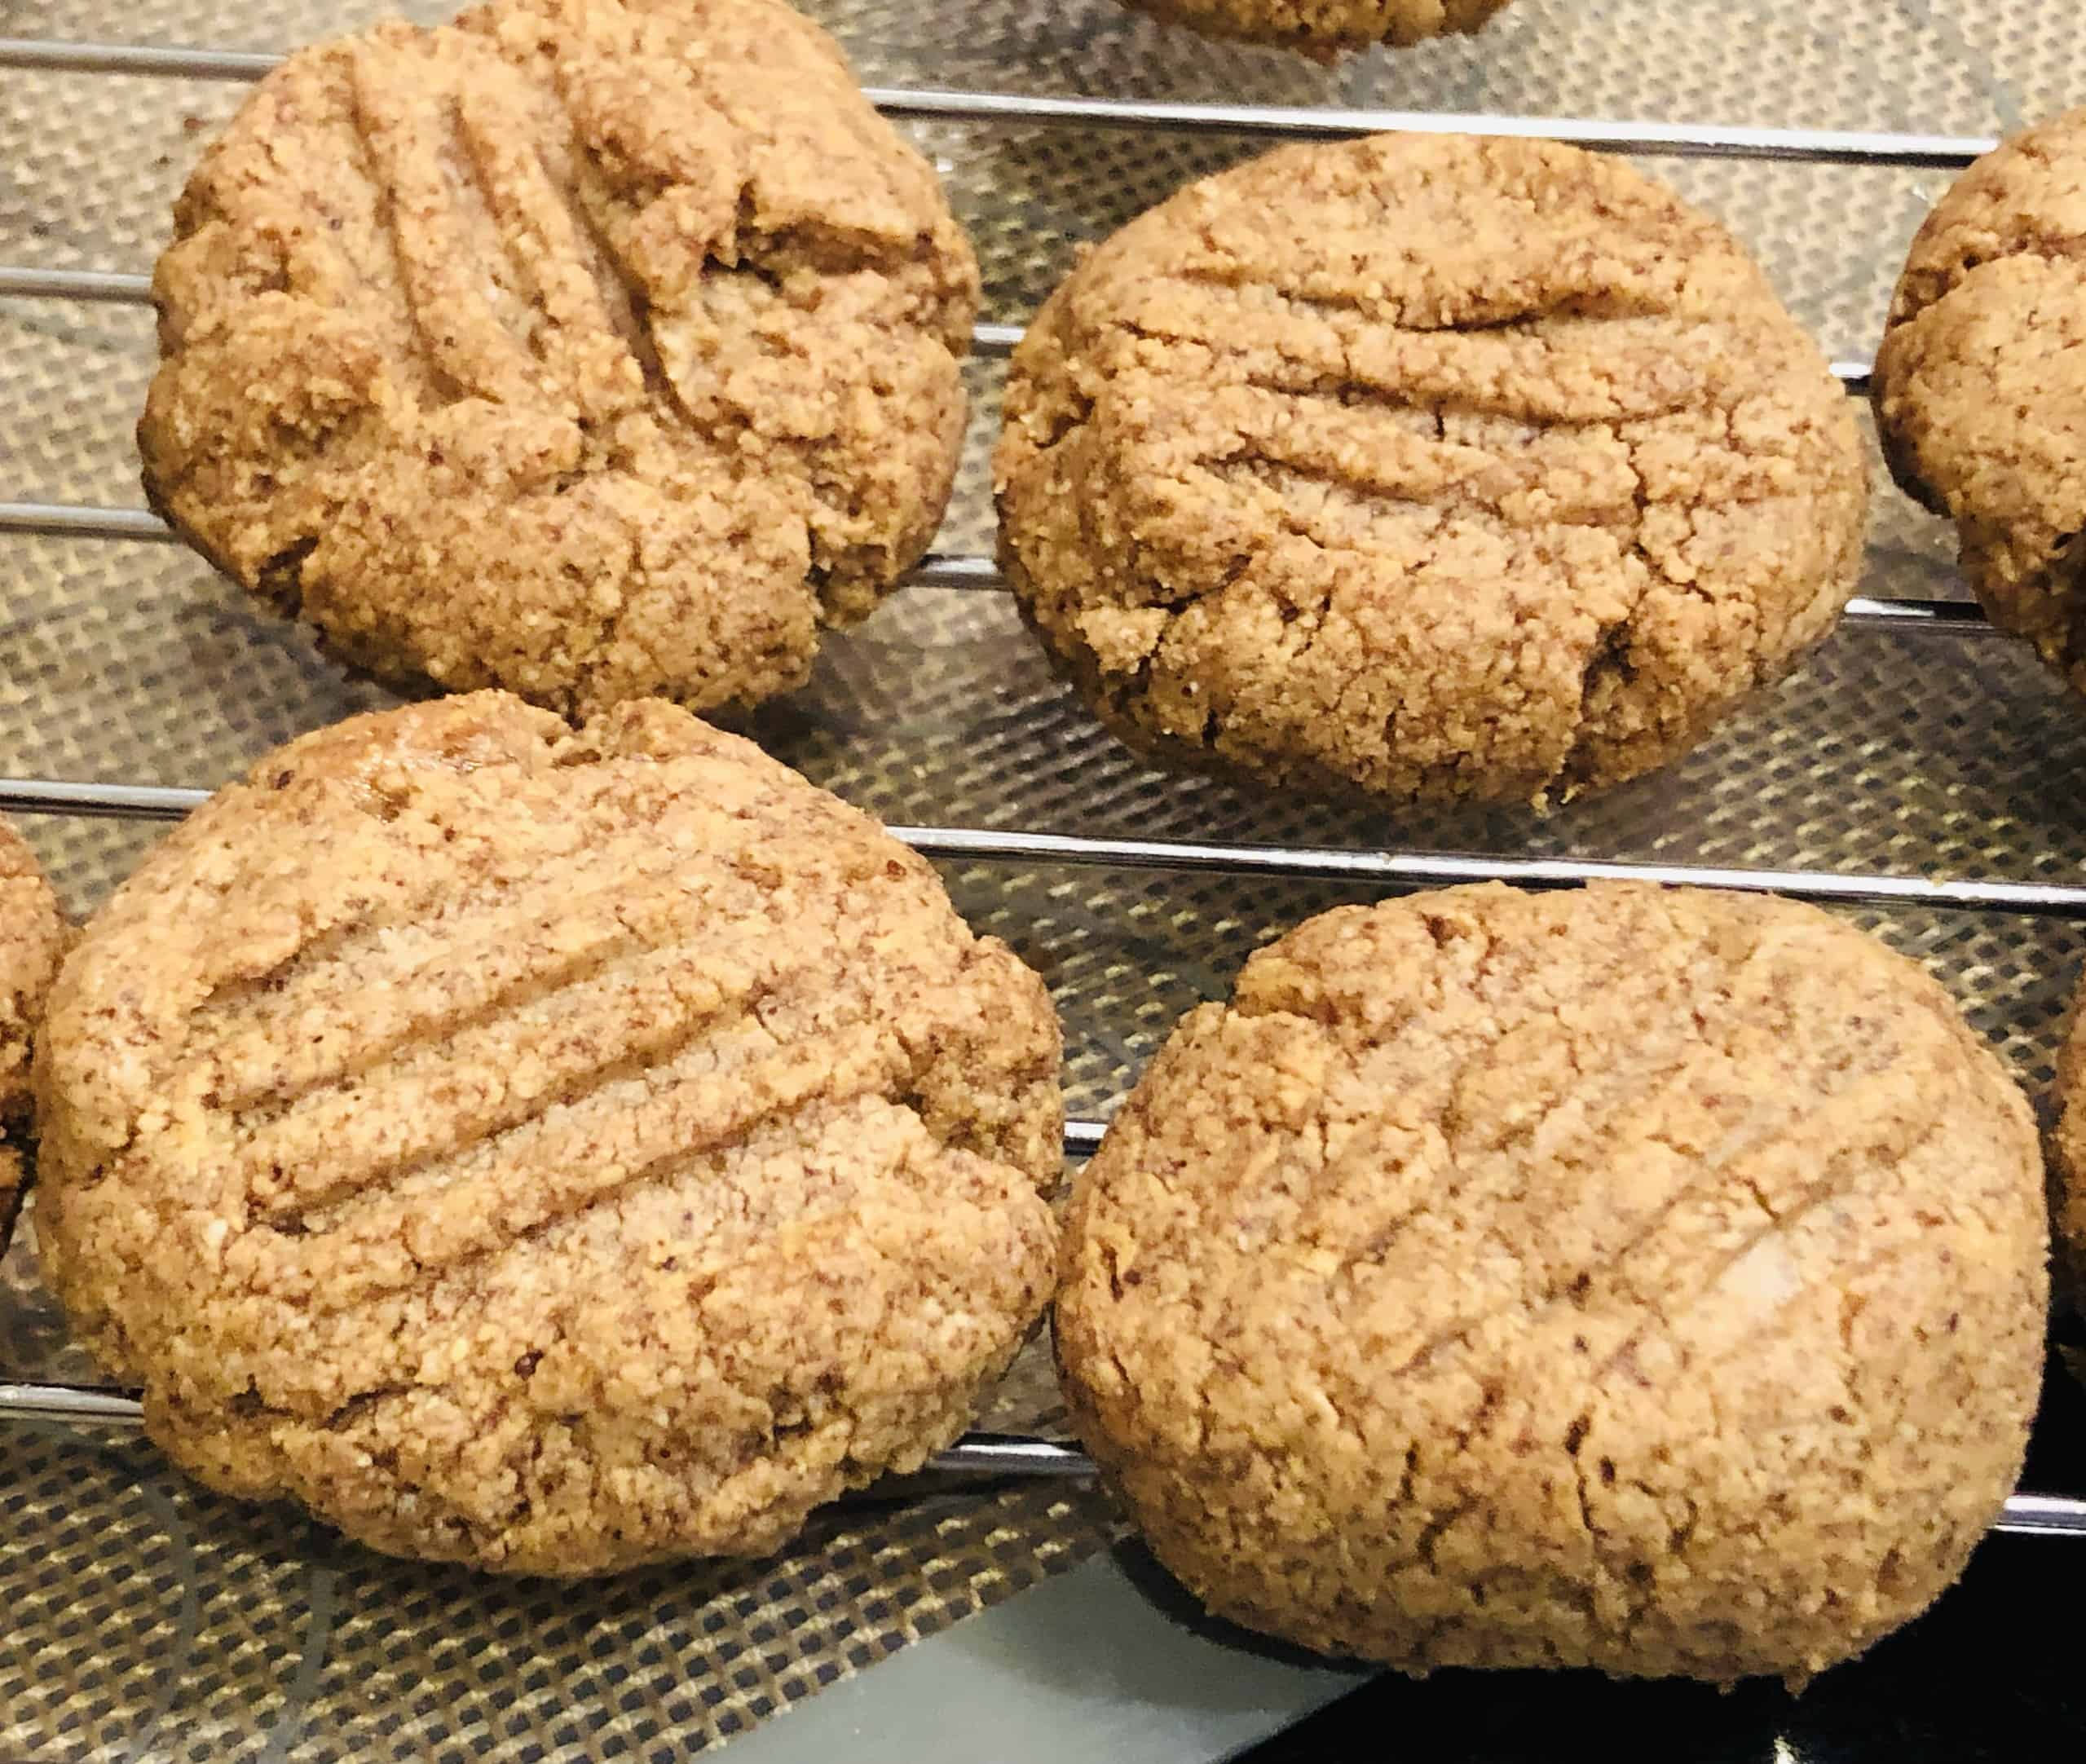 An image of Keto Cookies with Nut Butter